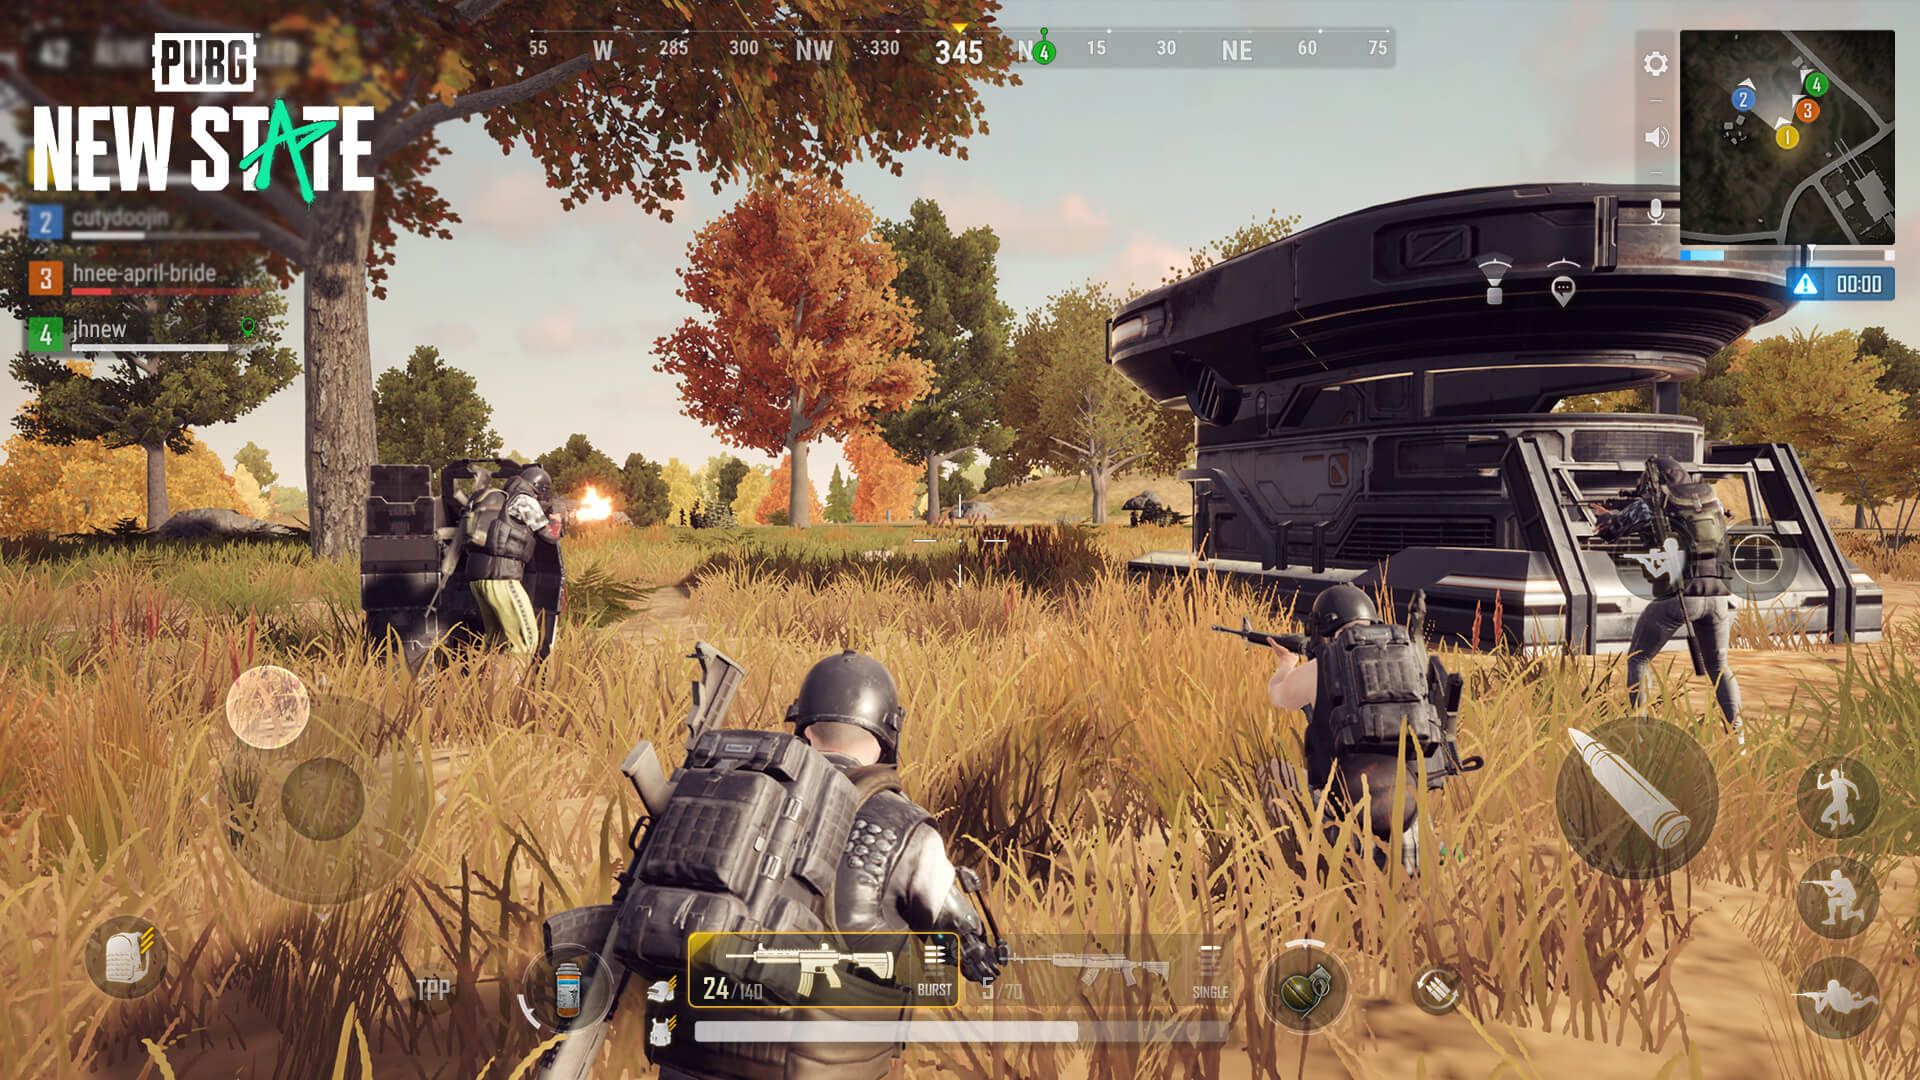 There's a new PUBG game coming to Android, and it's built from the ground up for mobile play